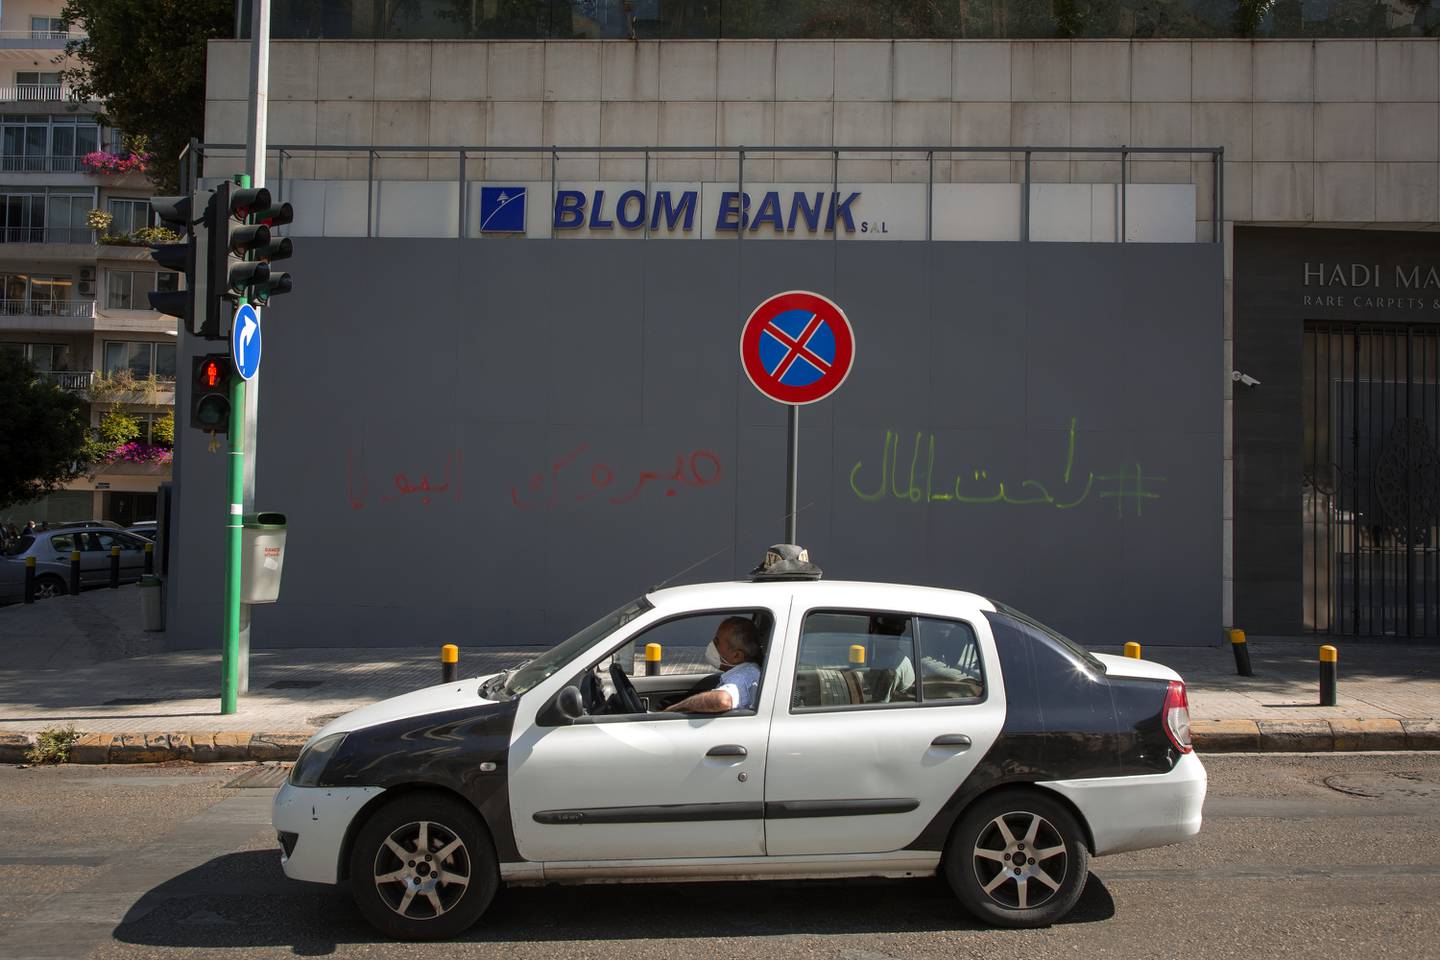 Landscapes of Lebanon and its financial activity.